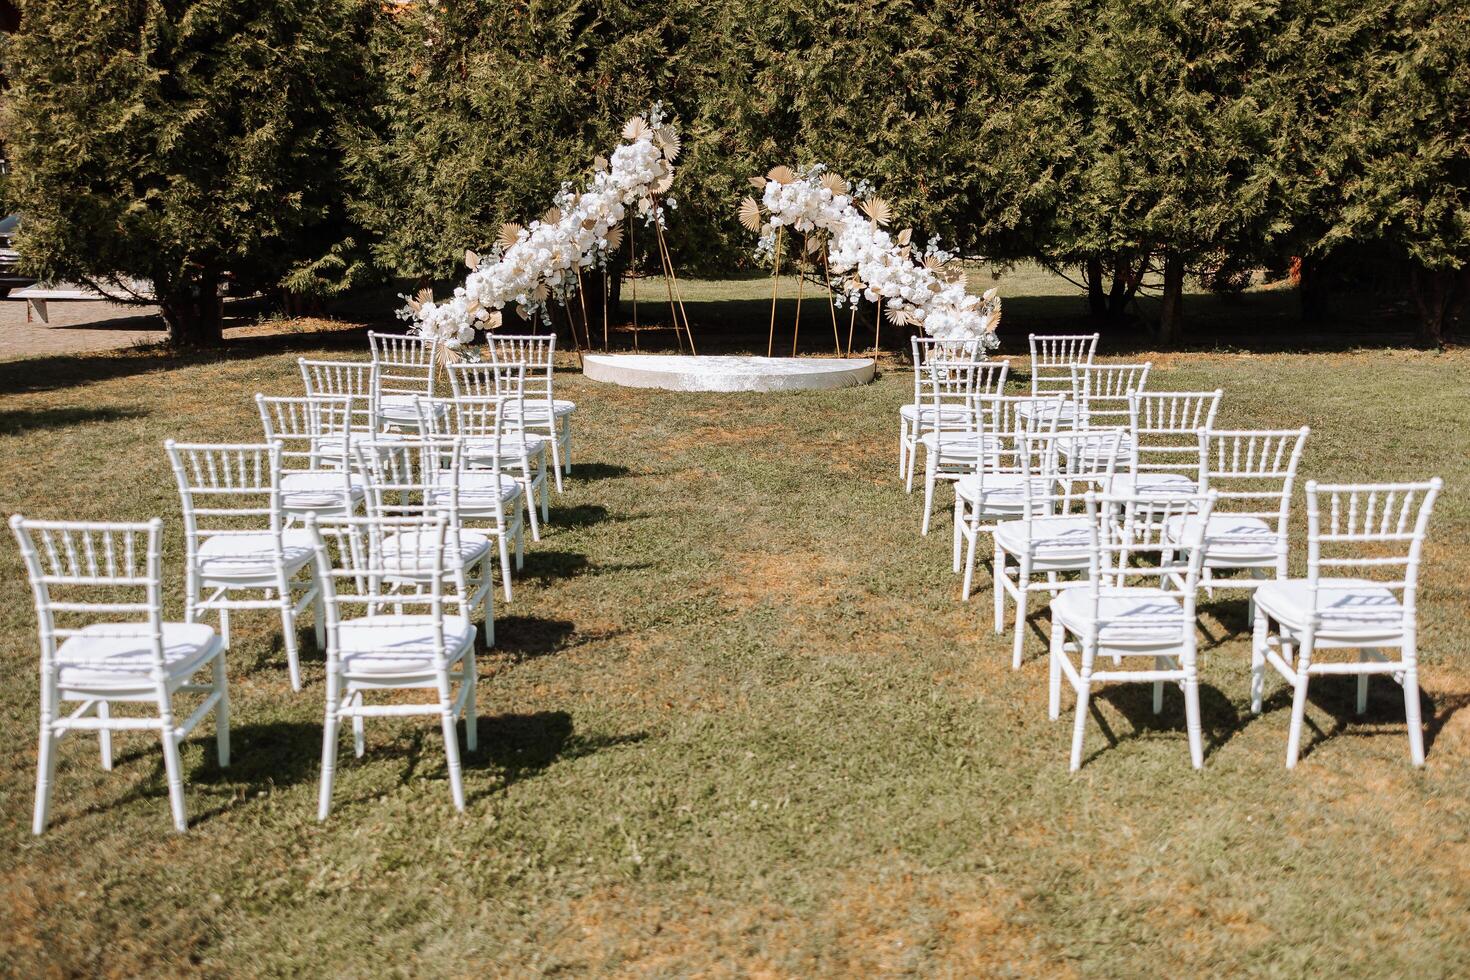 Decorative modern wedding arch made of white flowers in nature. Many white chairs for the wedding ceremony. Everything is ready for the celebration. photo